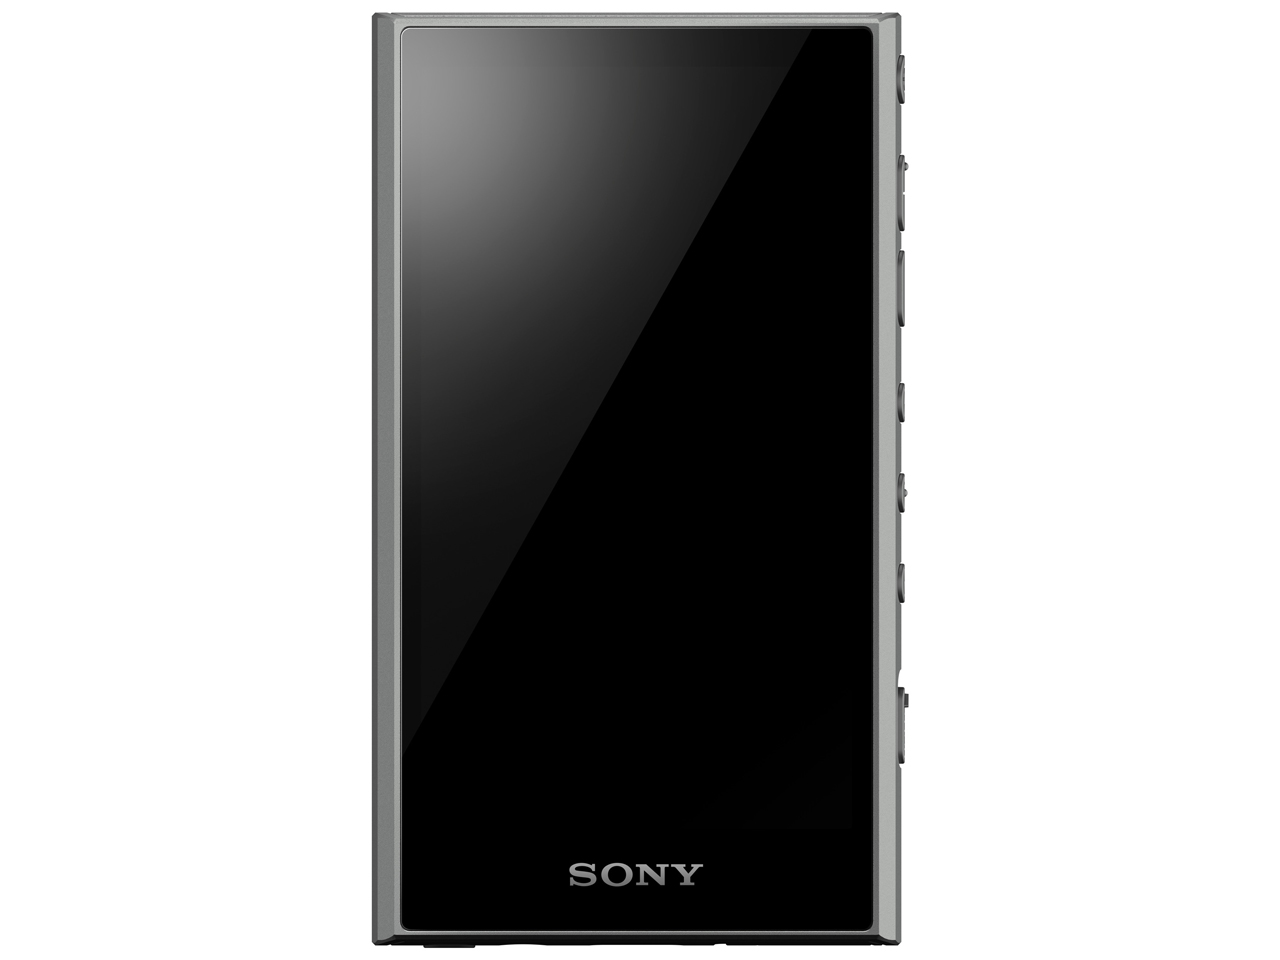 ★SONY NW-A306 (H) [32GB グレー]